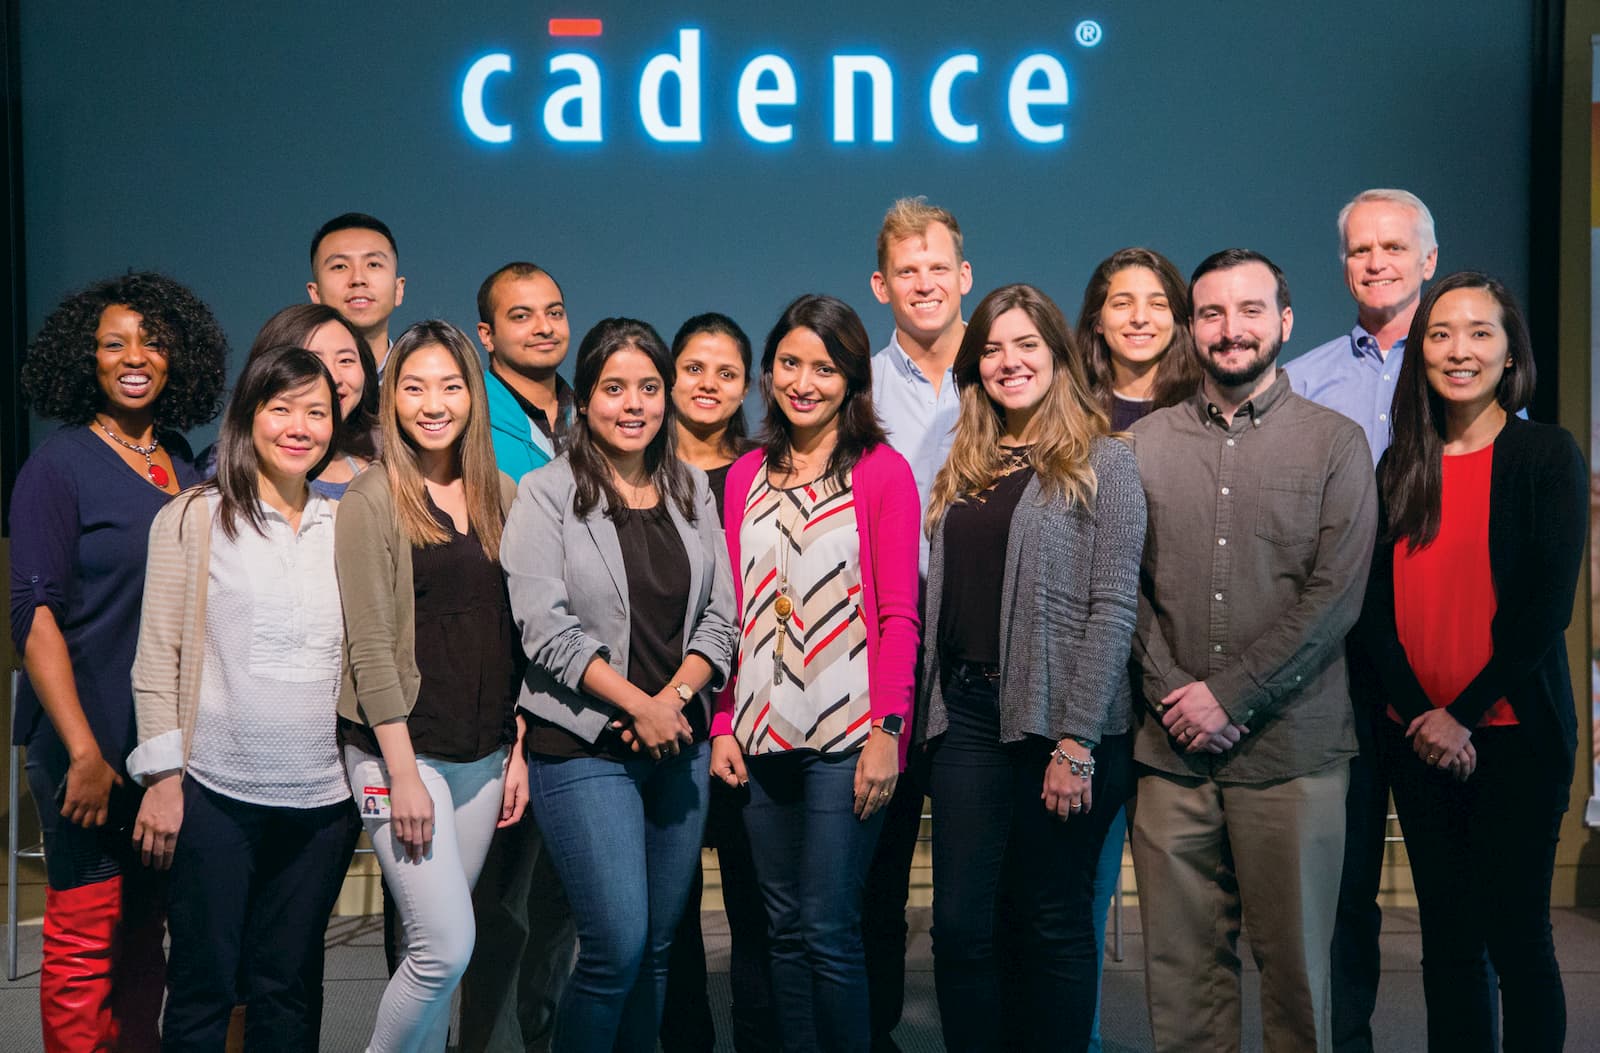  The Innovation by All Journey at Cadence